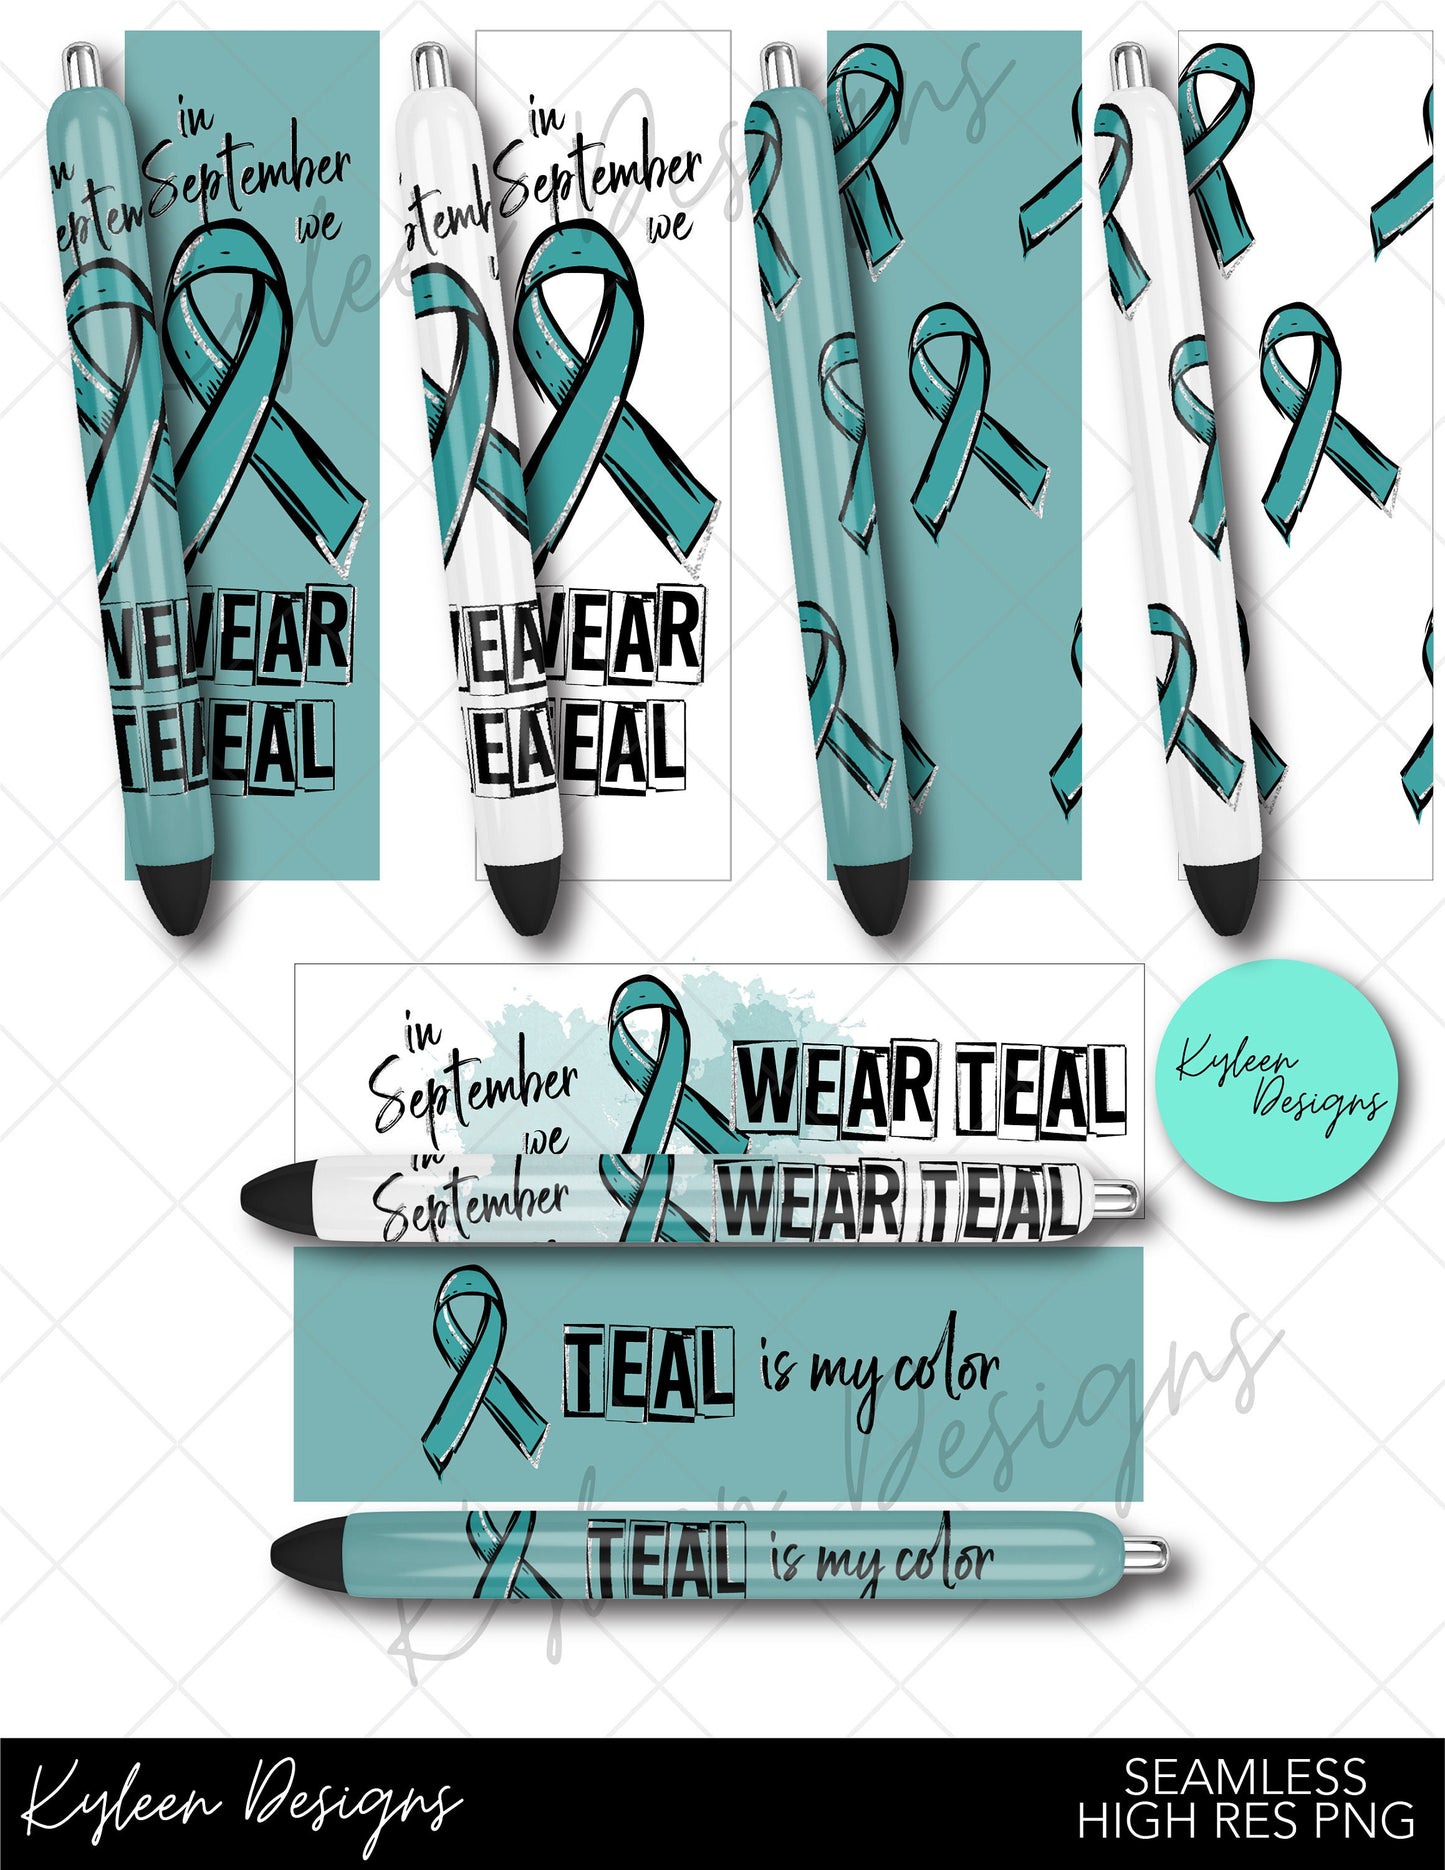 SEAMLESS ovarian cancer we wear teal in September pen wraps for waterslide high RES PNG